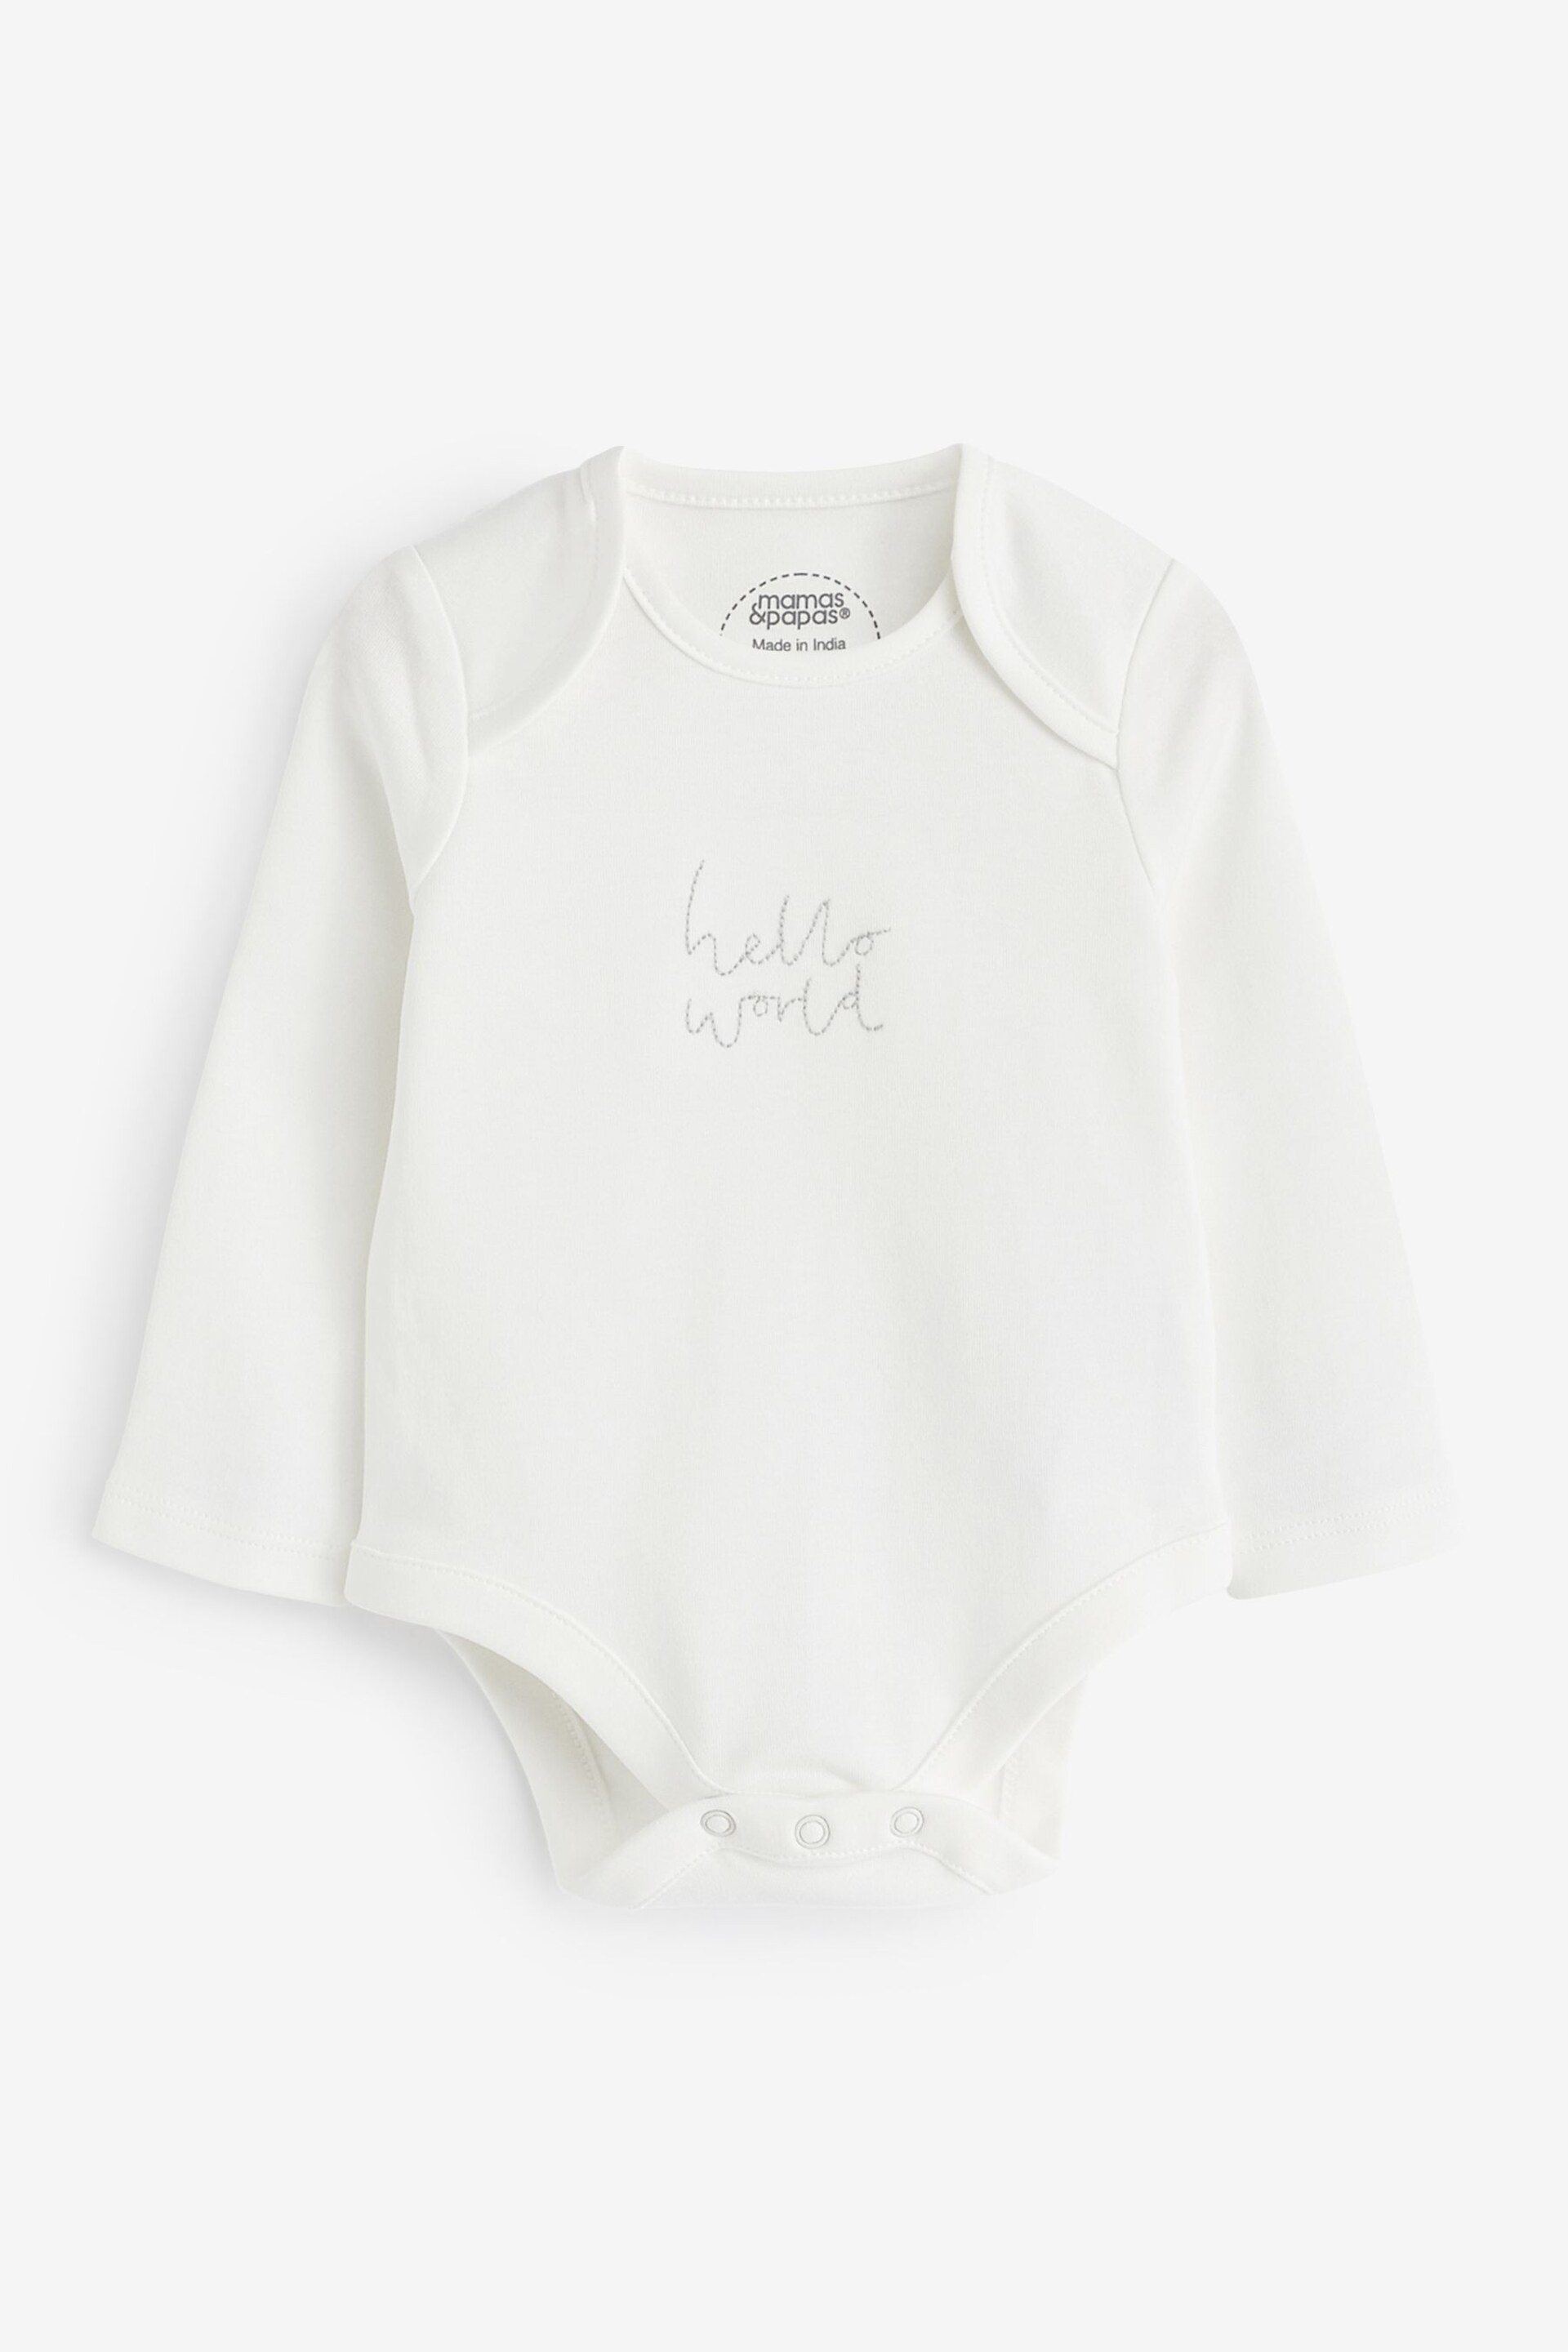 Mamas & Papas Welcome To The World My First Outfit White Bodysuit 3 Piece Set - Image 2 of 4